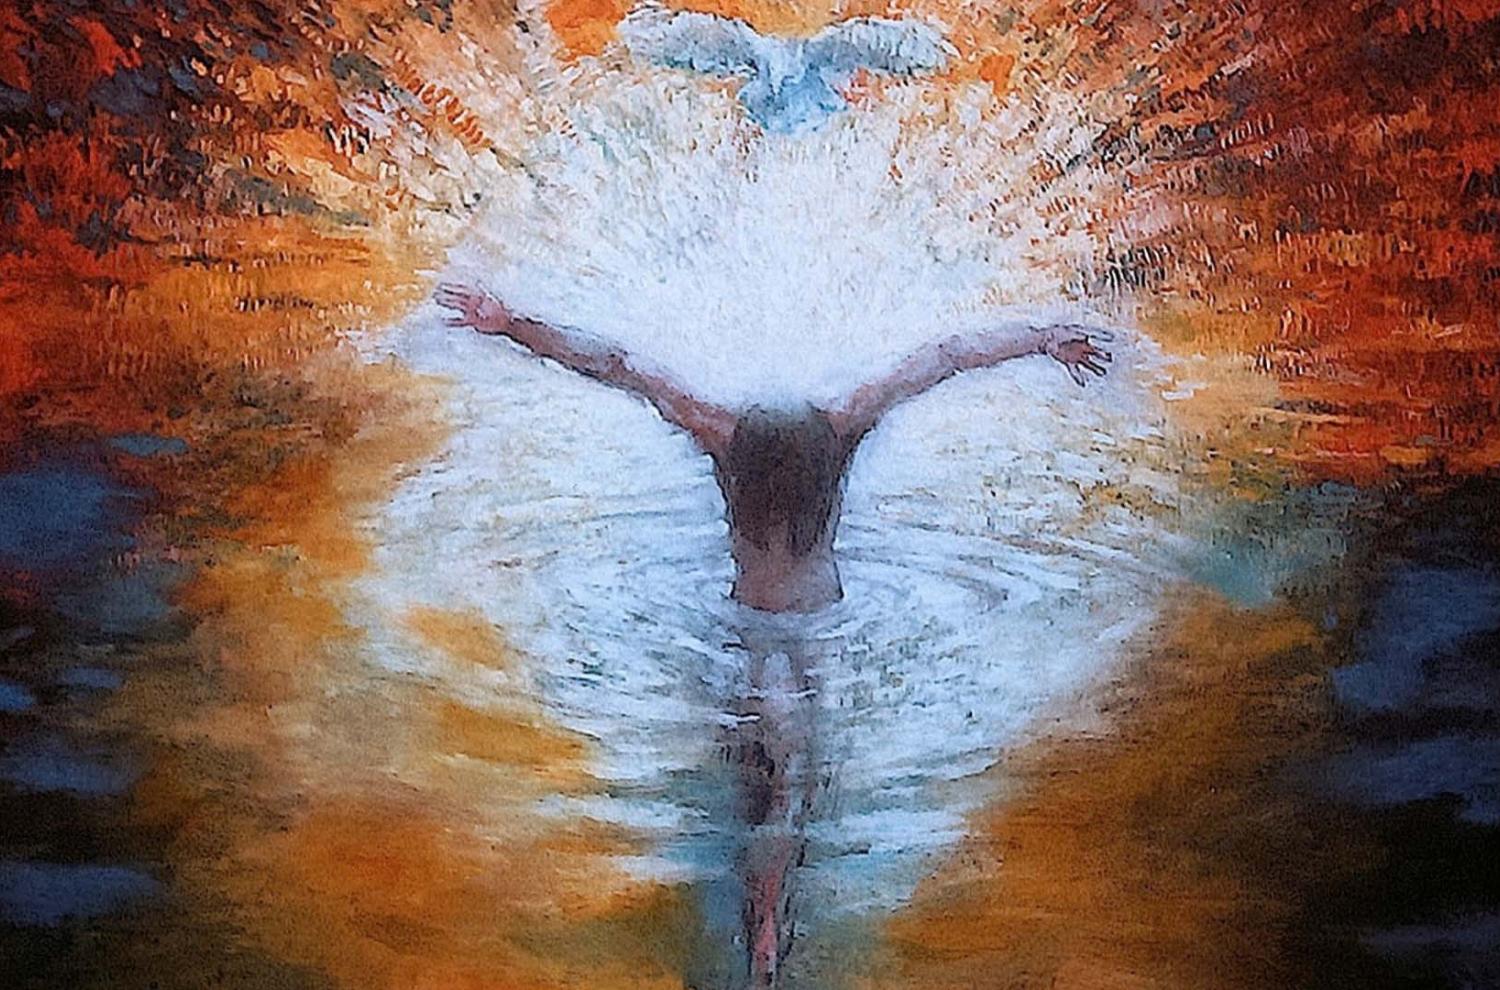 The Baptism of the Christ with Dove by Daniel Bonnell. Image via Fine Art America.